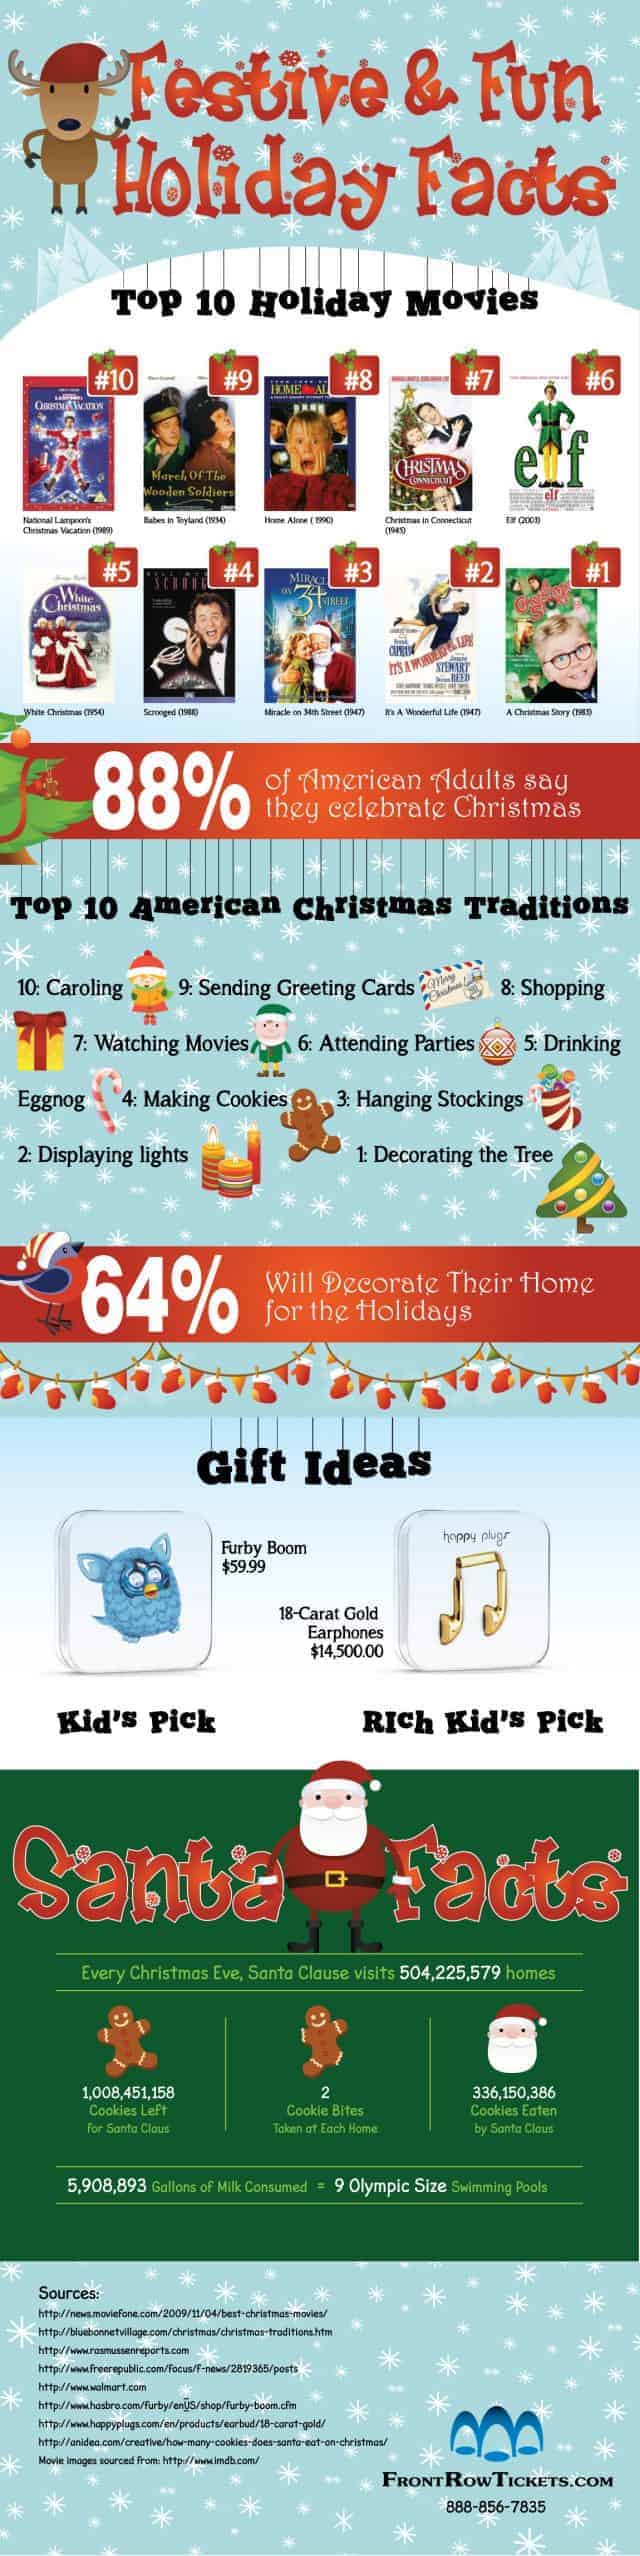 Festive and Fun Holiday Facts